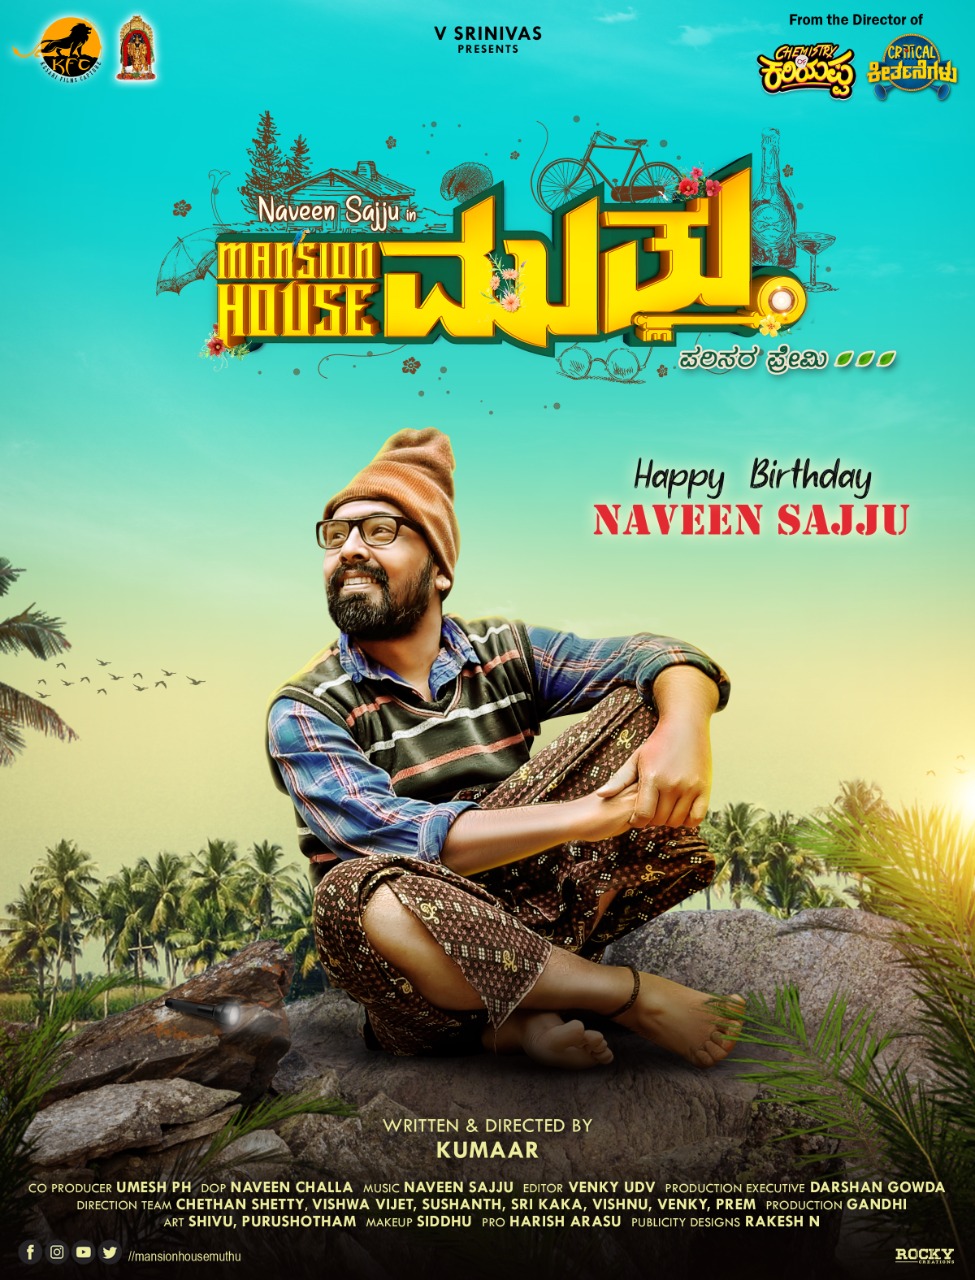 Singer Naveen Sajju’s debut film as hero titled Mansion House Mutthu